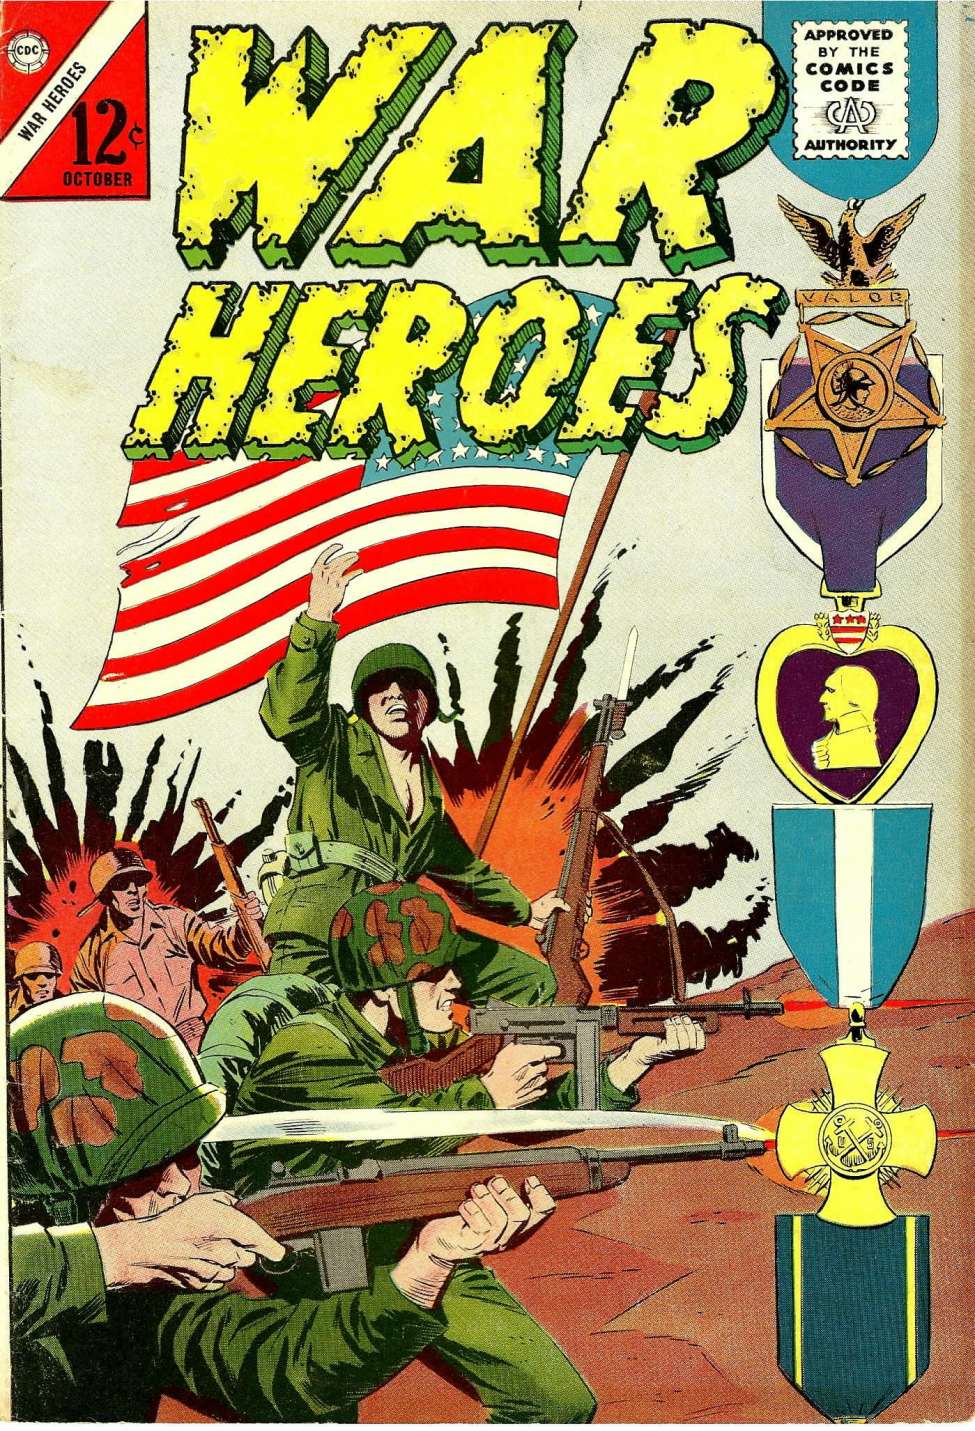 Comic Book Cover For War Heroes 10